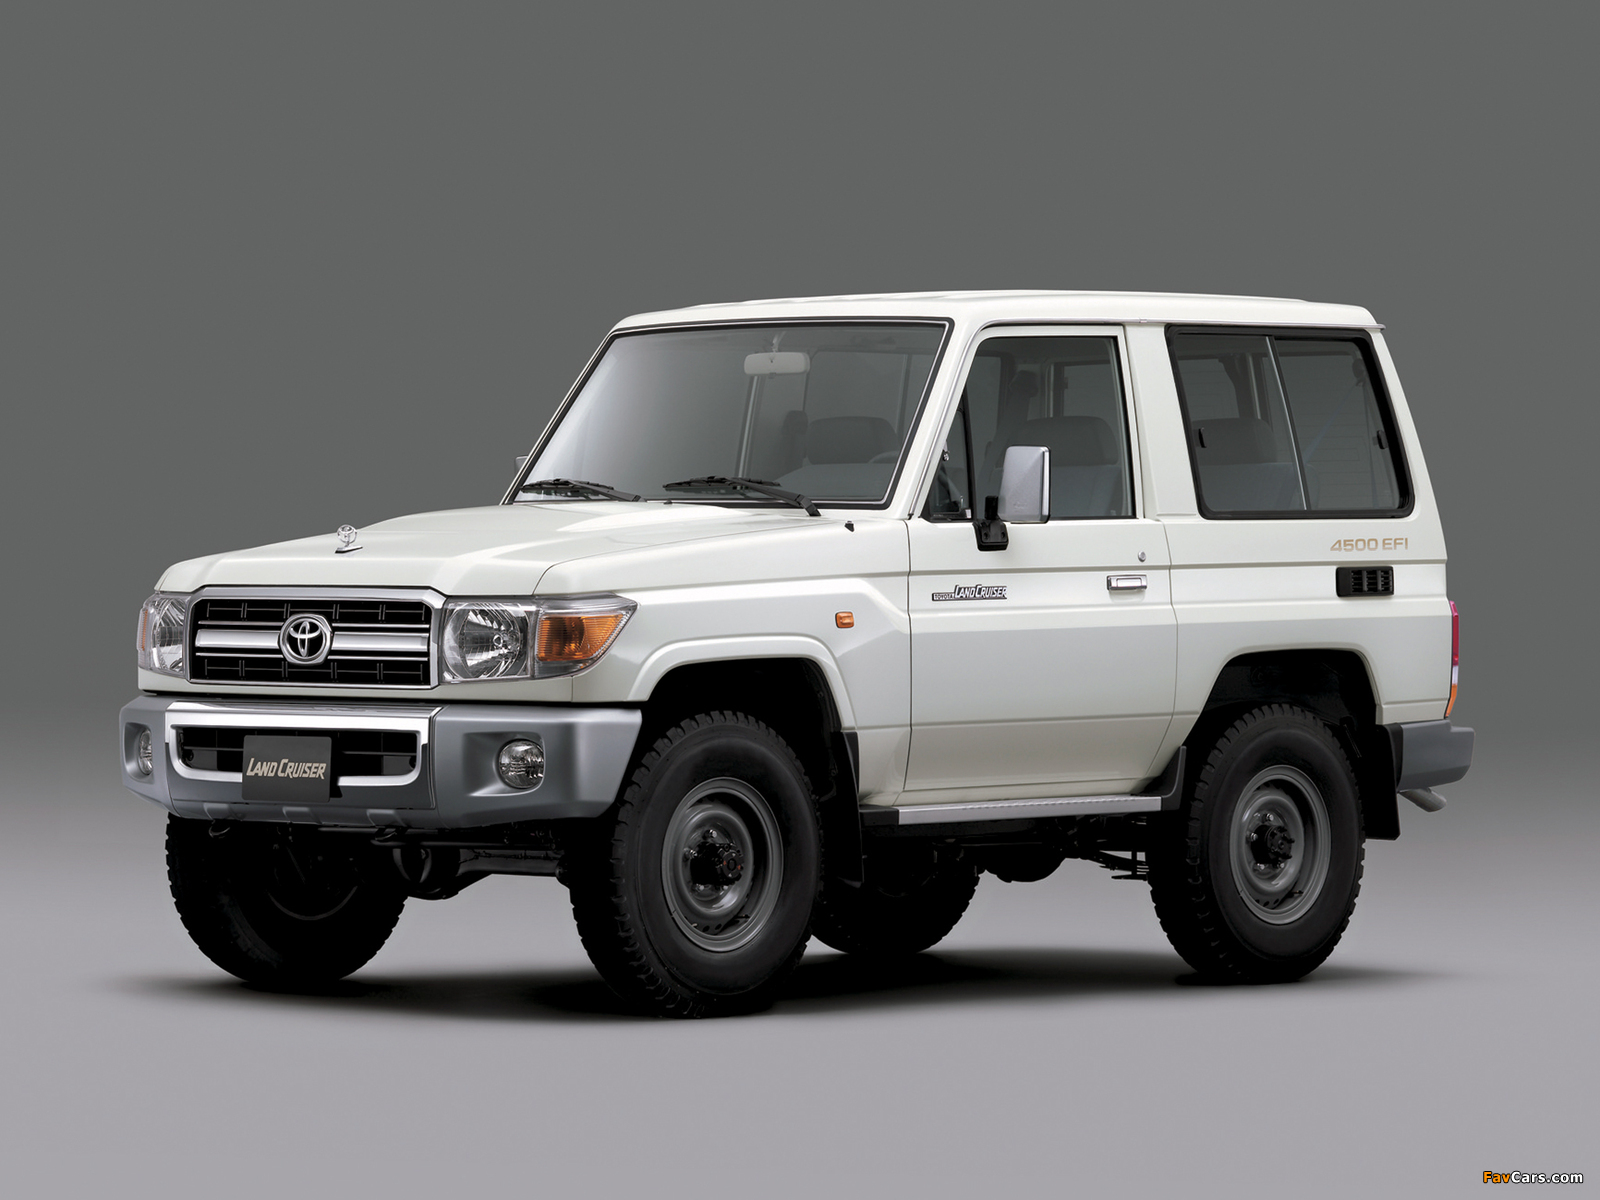 Toyota Land Cruiser (J71) 2007 pictures (1600 x 1200)